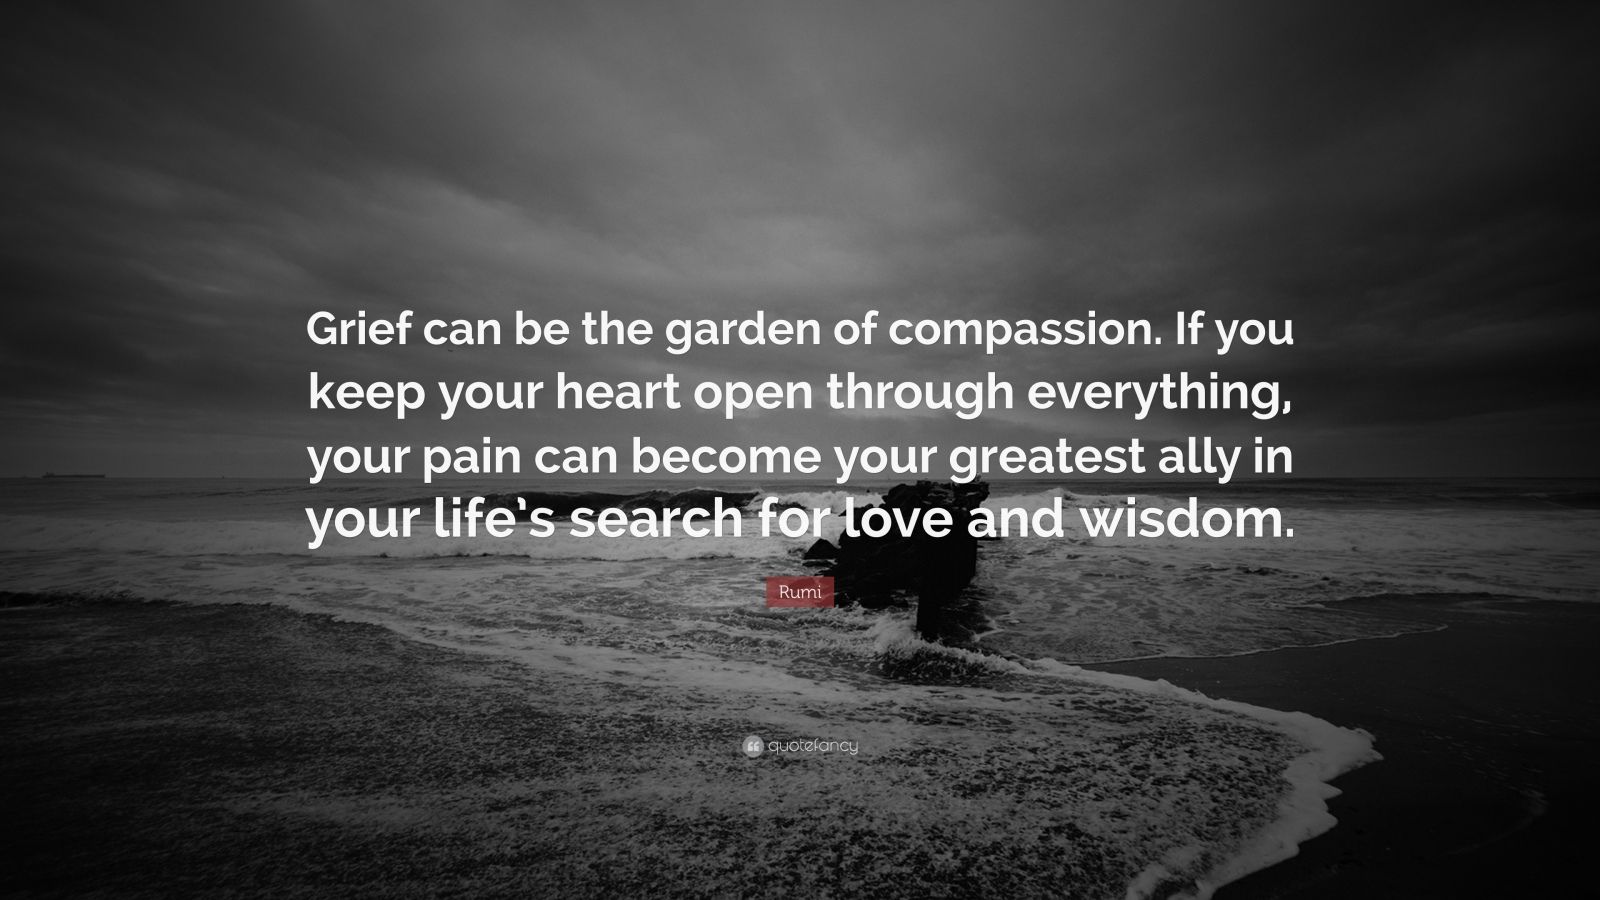 Rumi Quote “Grief can be the garden of passion If you keep your